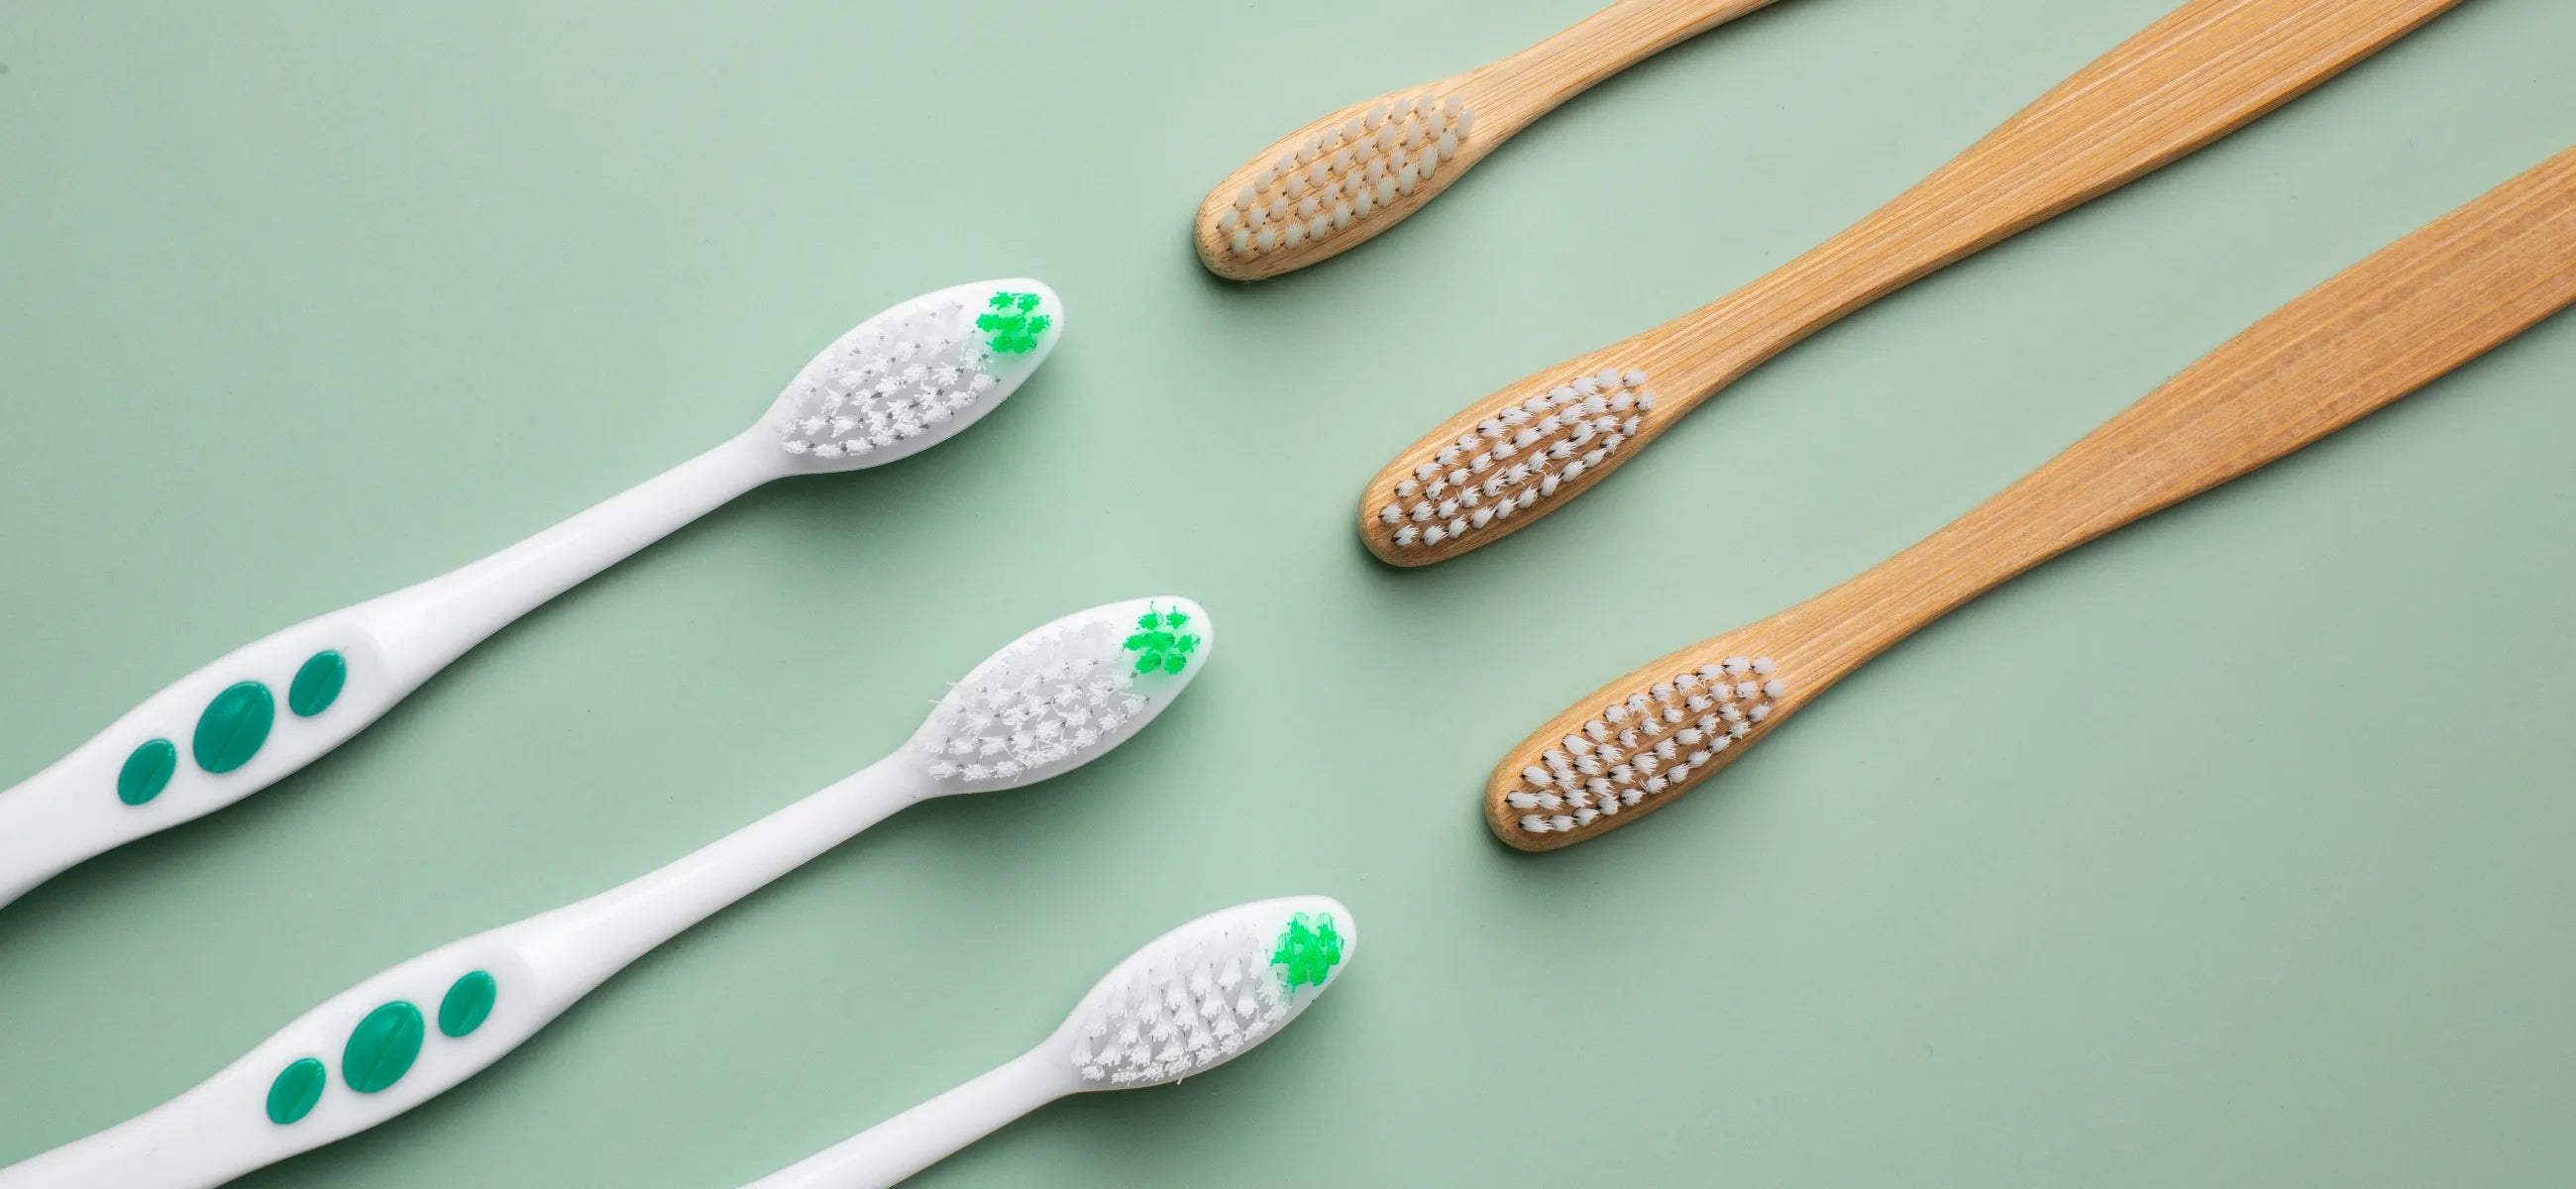 Top 5 best manual toothbrushes - Reviewed by dentists